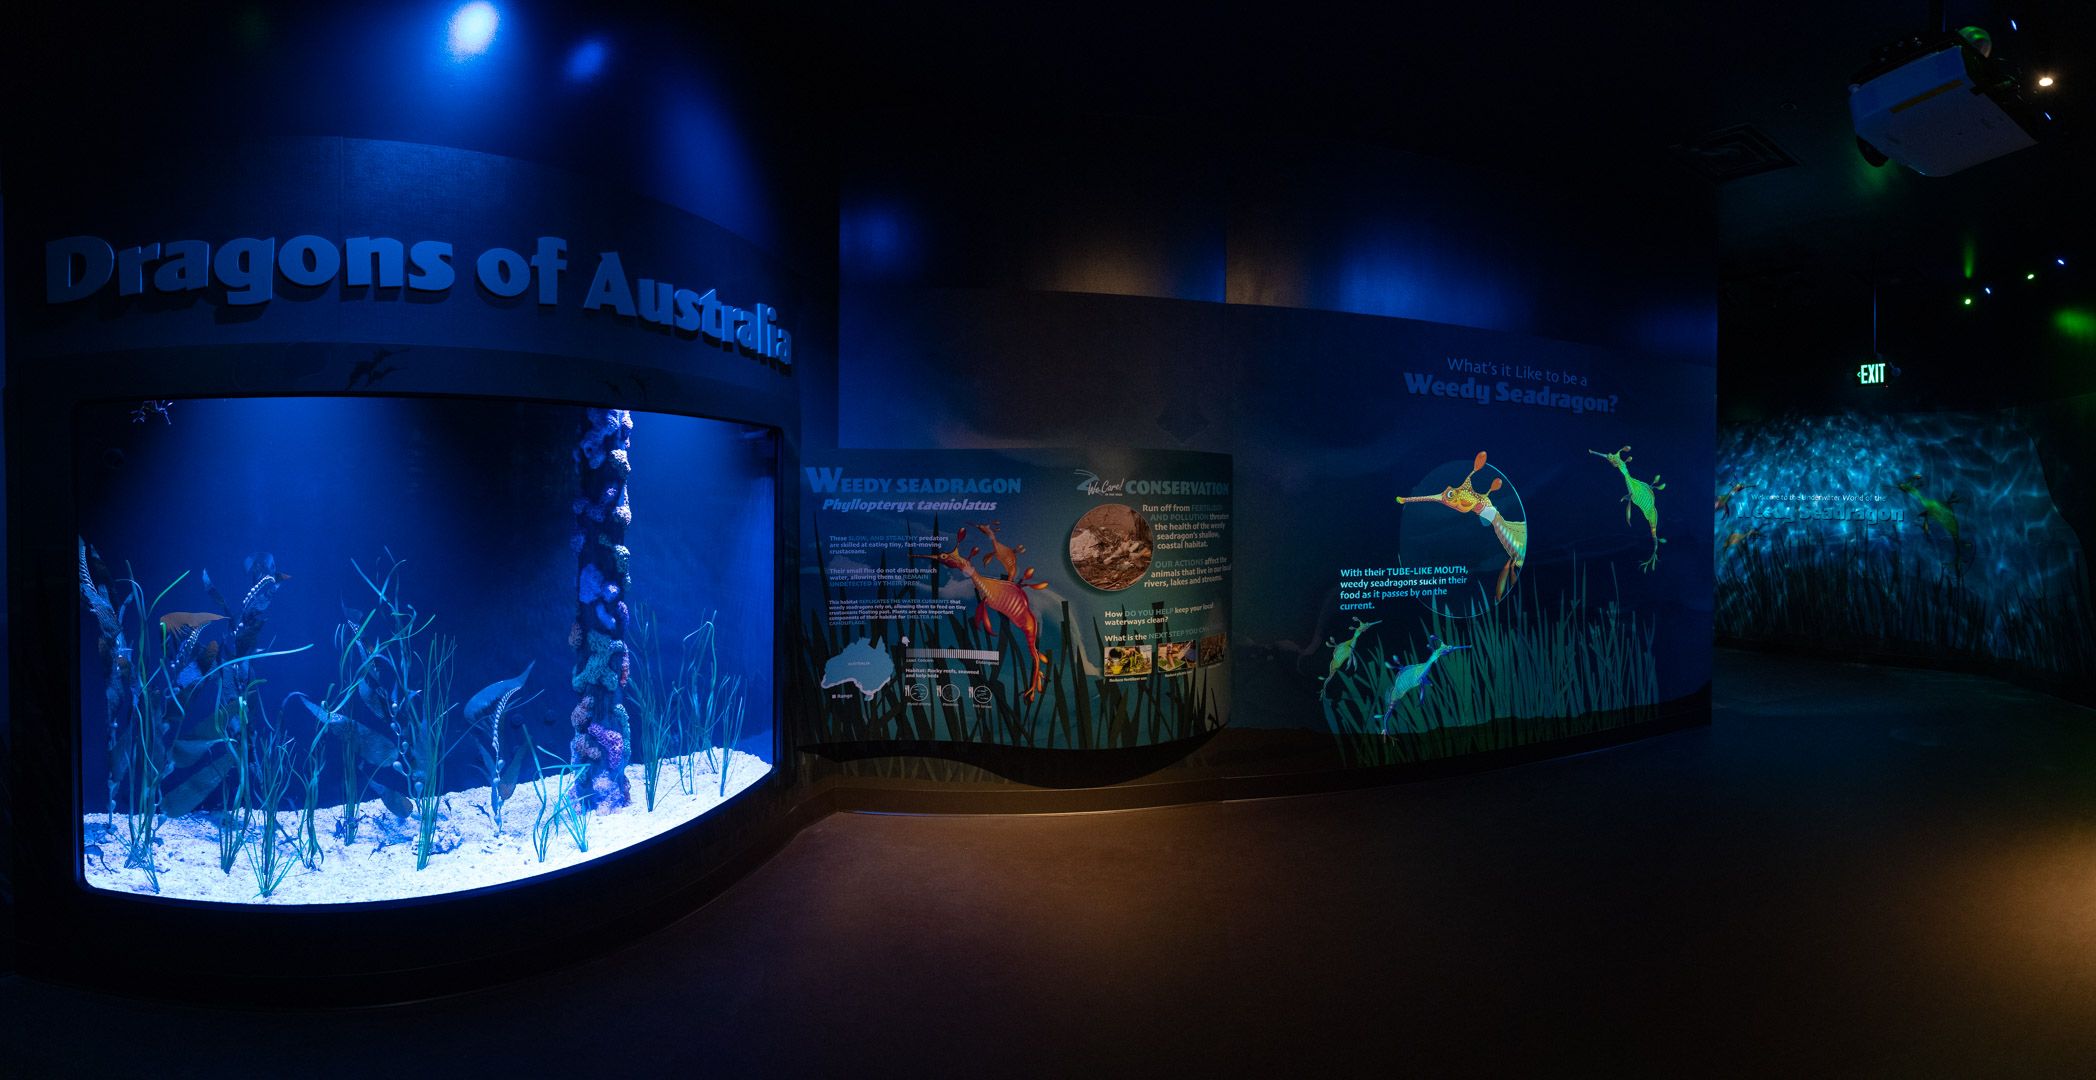 The zoo's new weedy seadragon exhibit, with an aquarium to the left and illustrated educational displays to the right